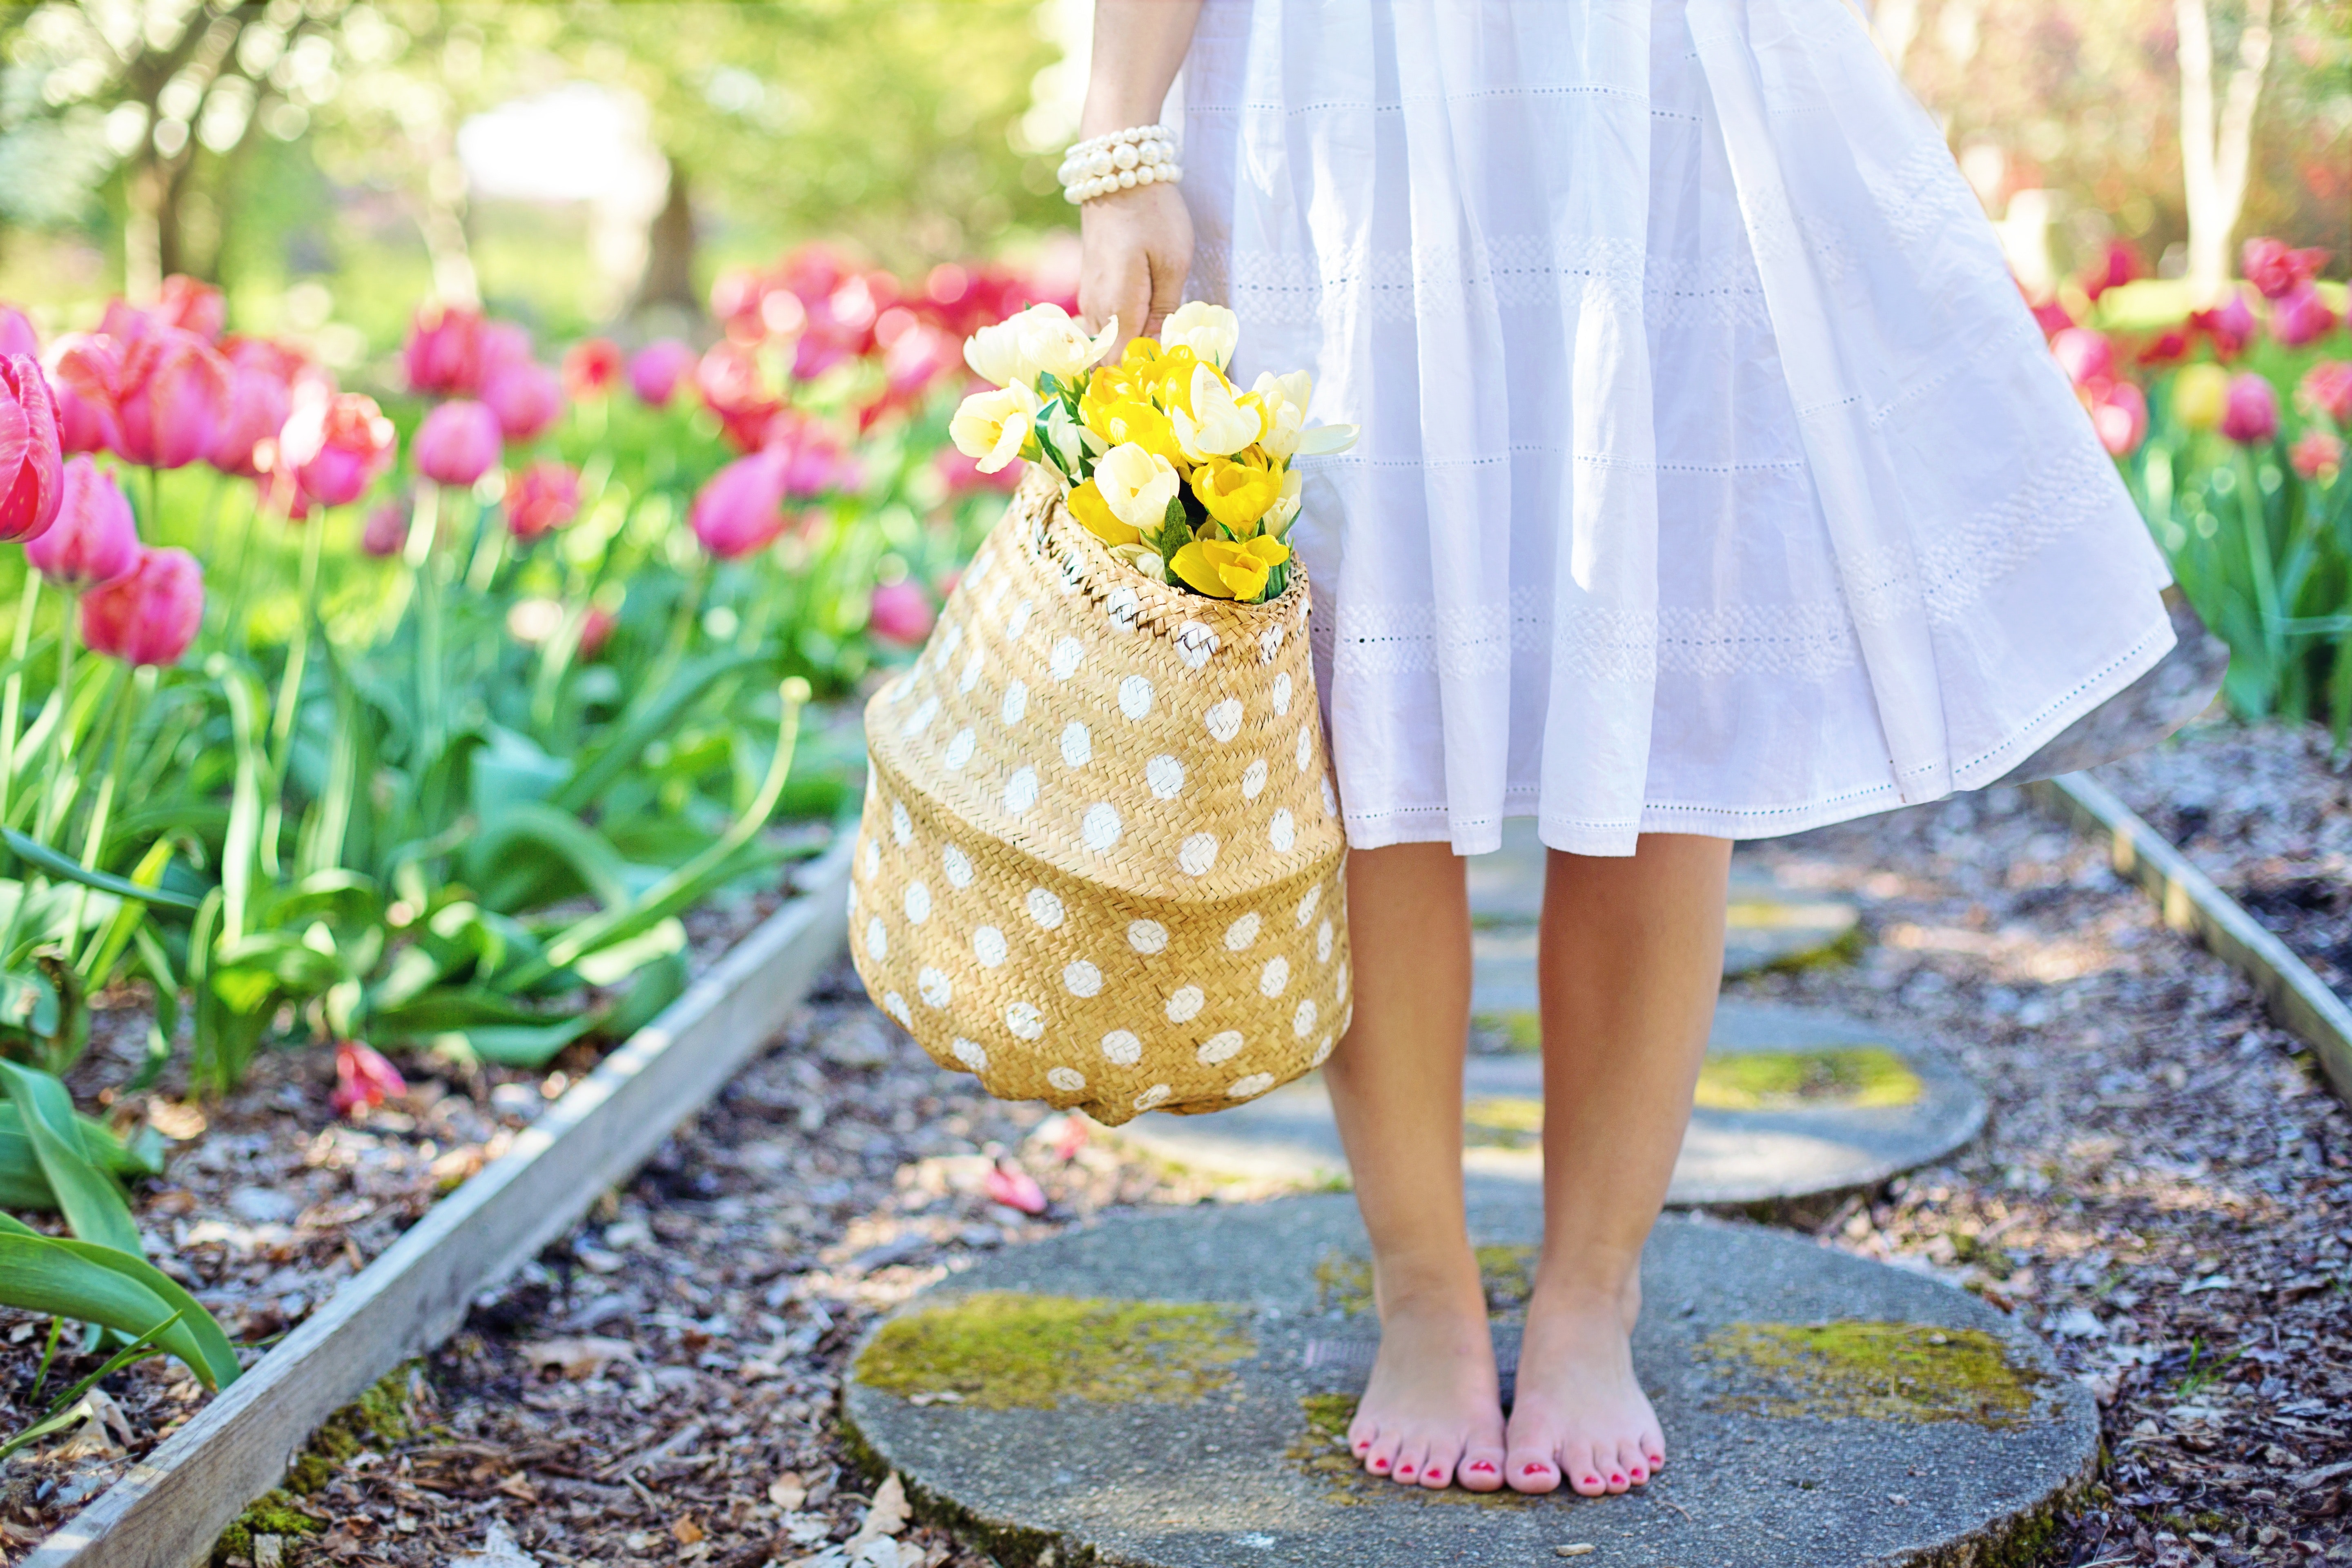 barefoot-blooming-blossoms-413707